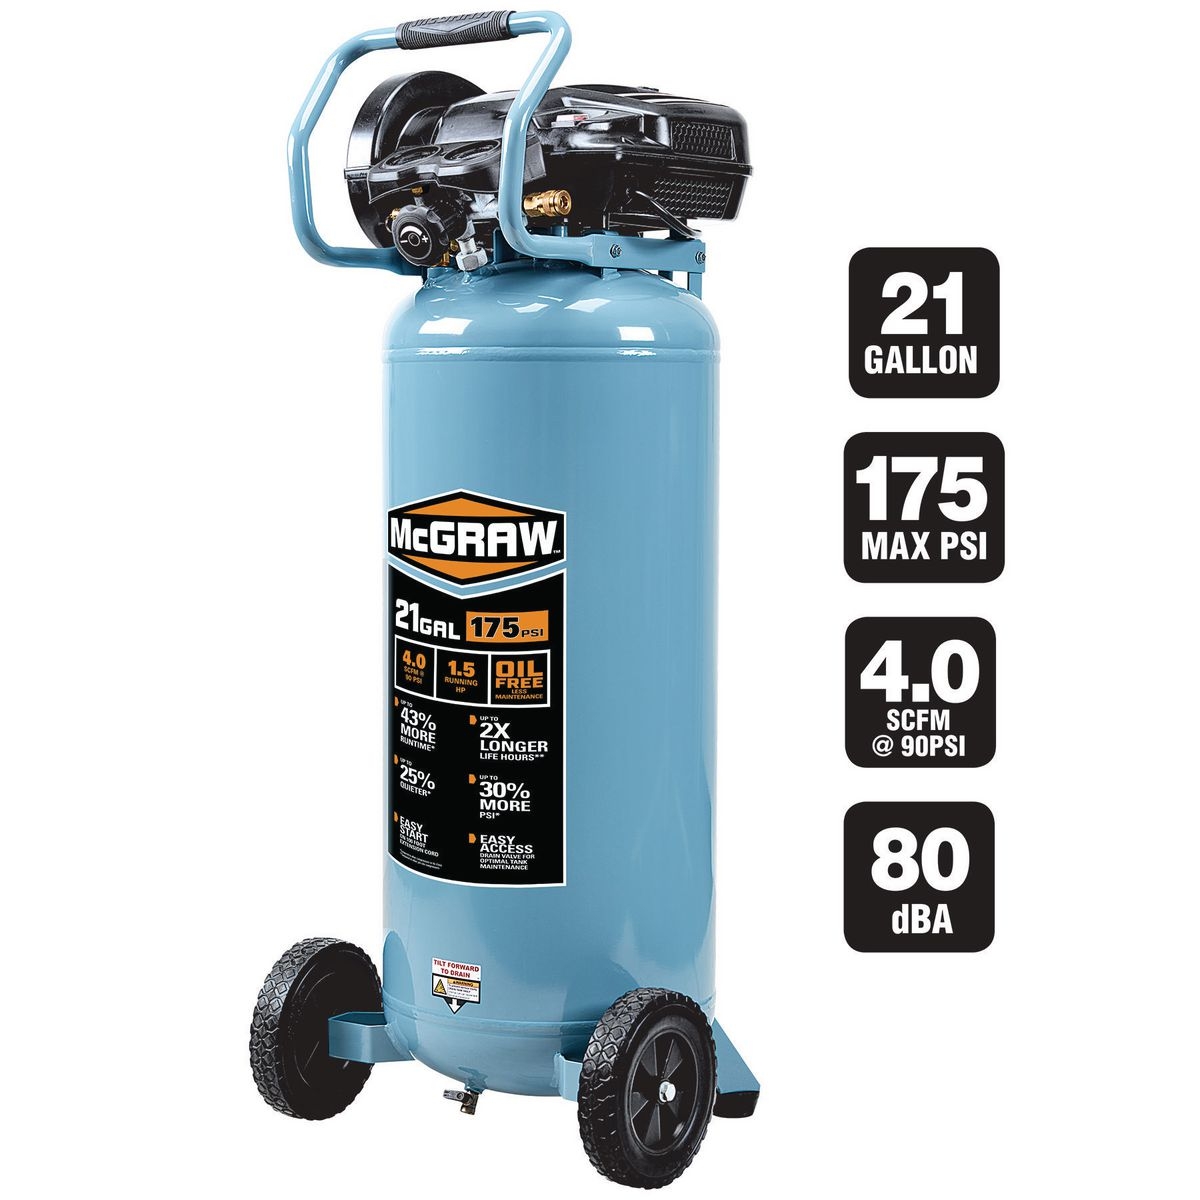 Search for Air Compressor Coupons